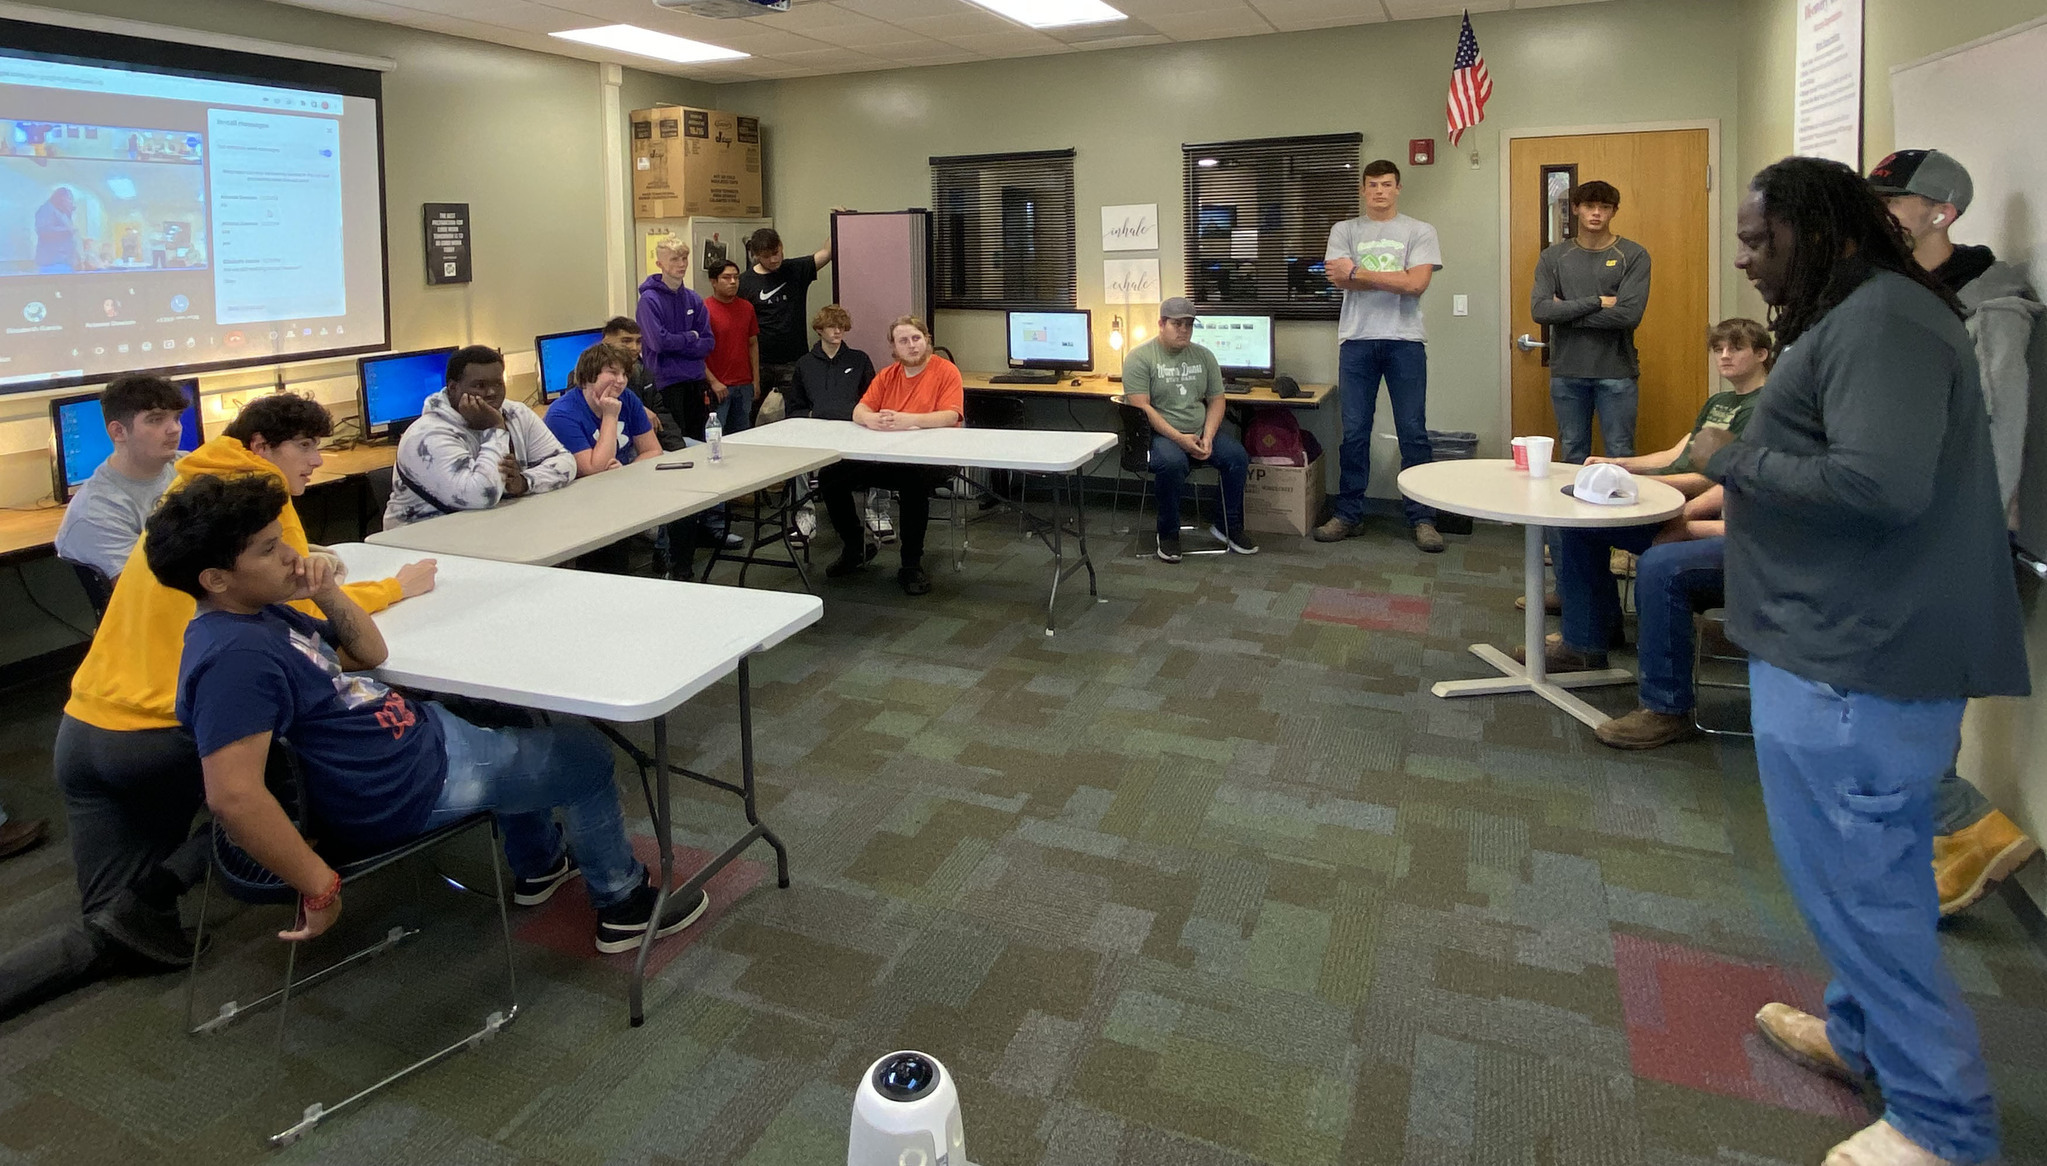 The Construction Trades Class presented CTE courses and career paths to students in the DA Job Genius program.